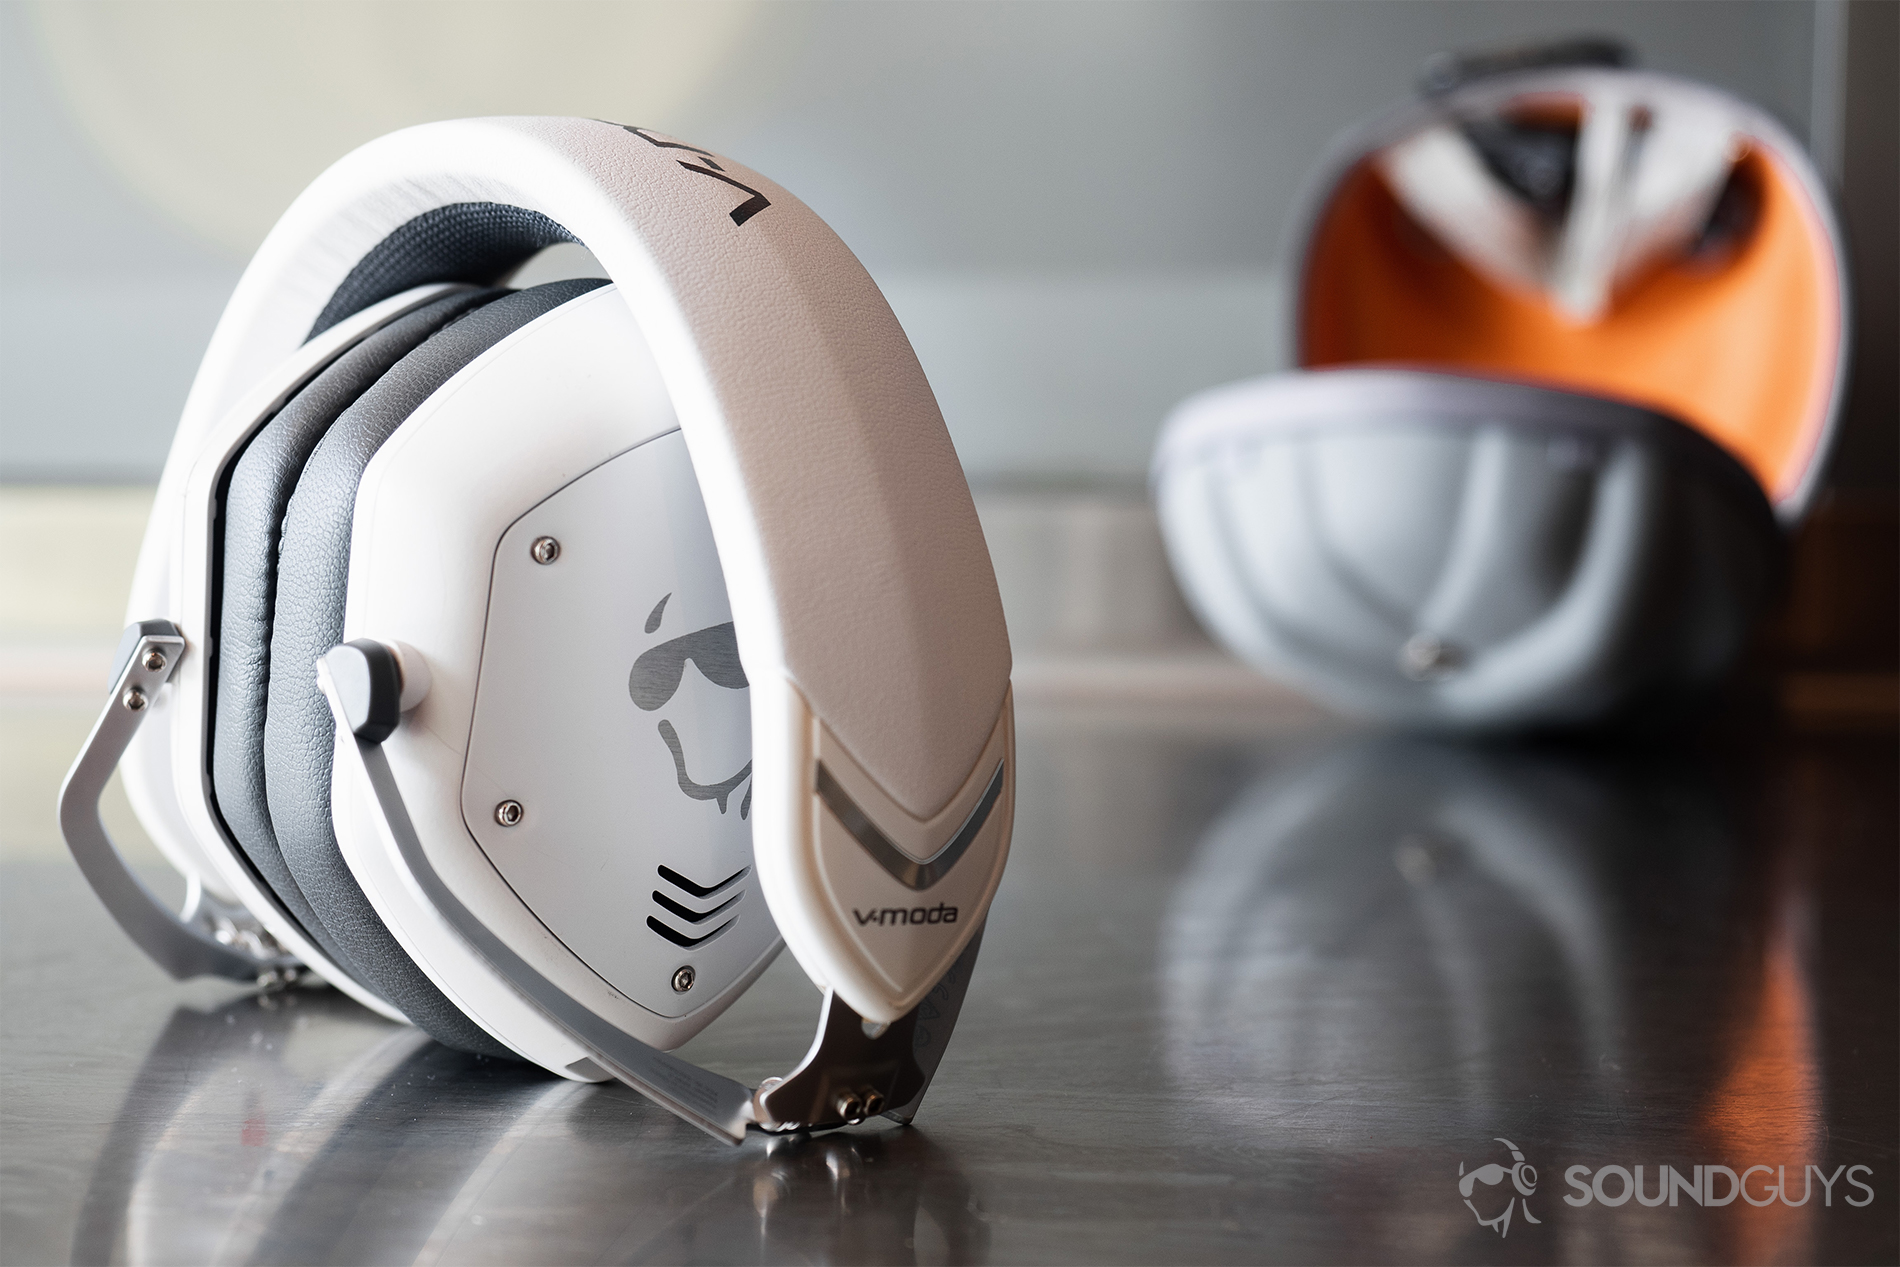 The V-Moda Crossfade 2 Codex headphones folded up but standing on a reflective surface wtih the clam shell Exoskeleton case in the background.